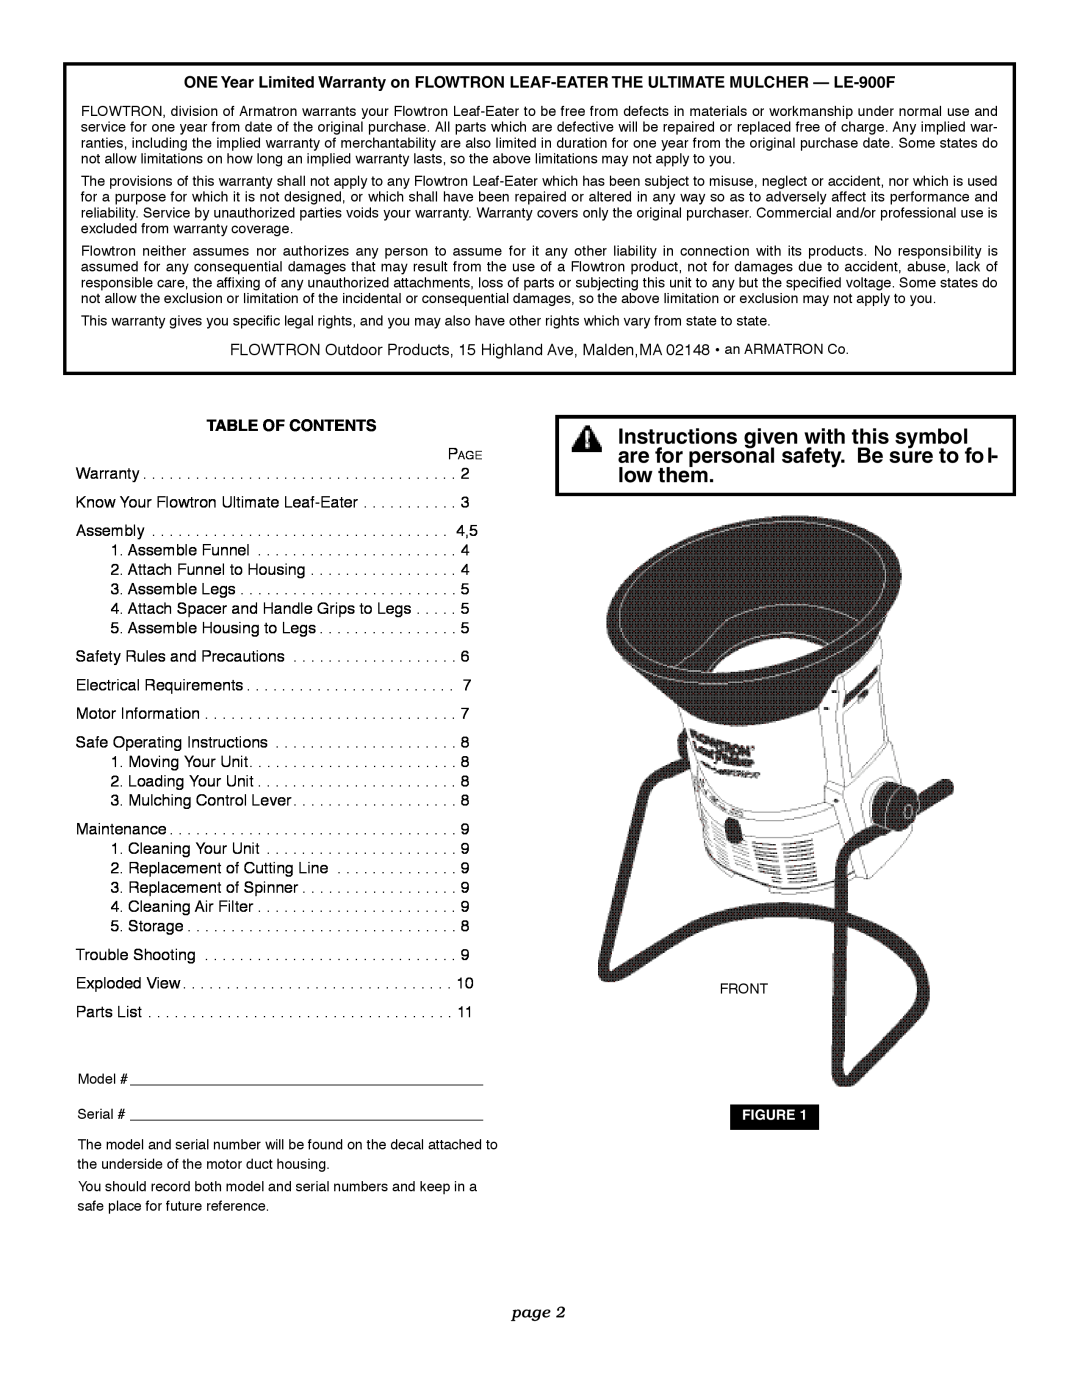 Flowtron Outdoor Products LE-900F owner manual Table Of Contents, page 